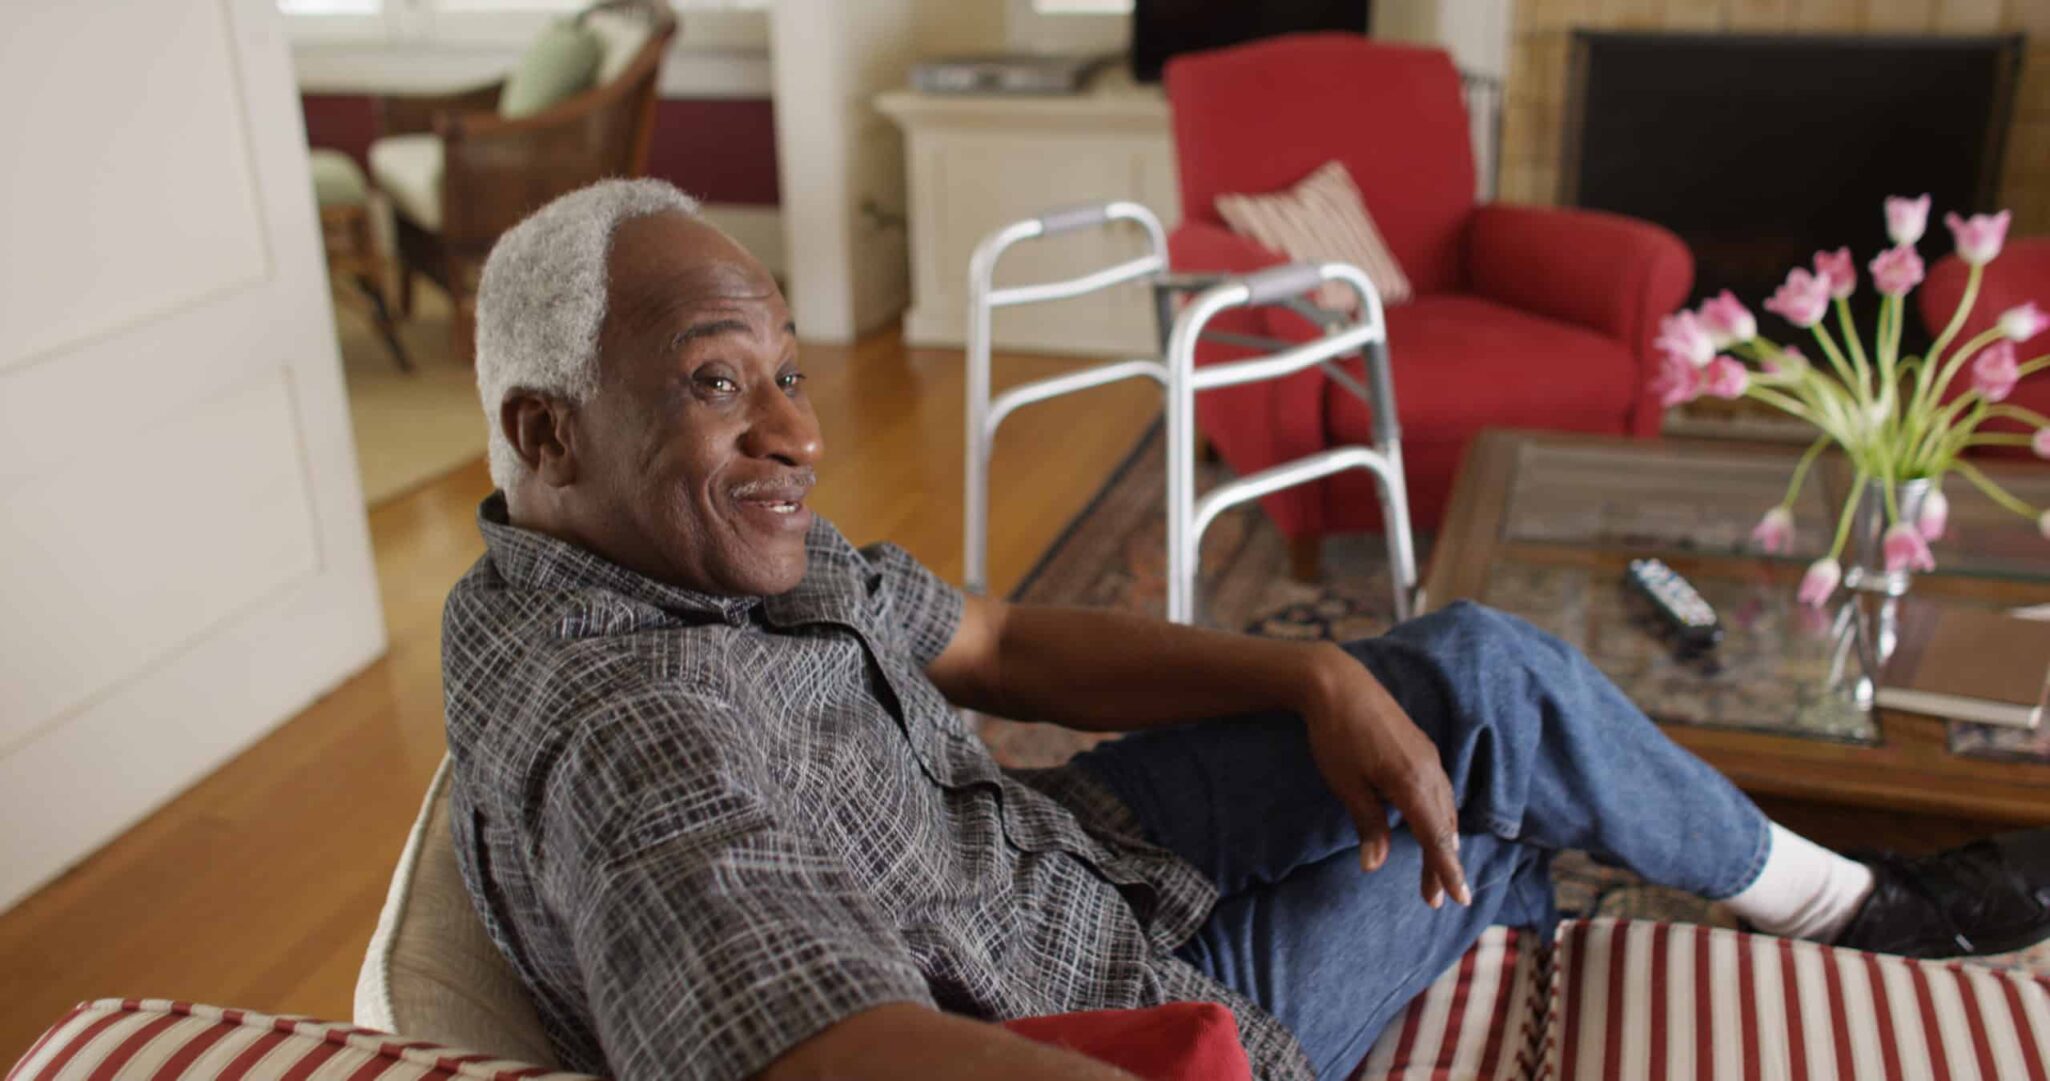 Retired African man relaxed and talking on his couch